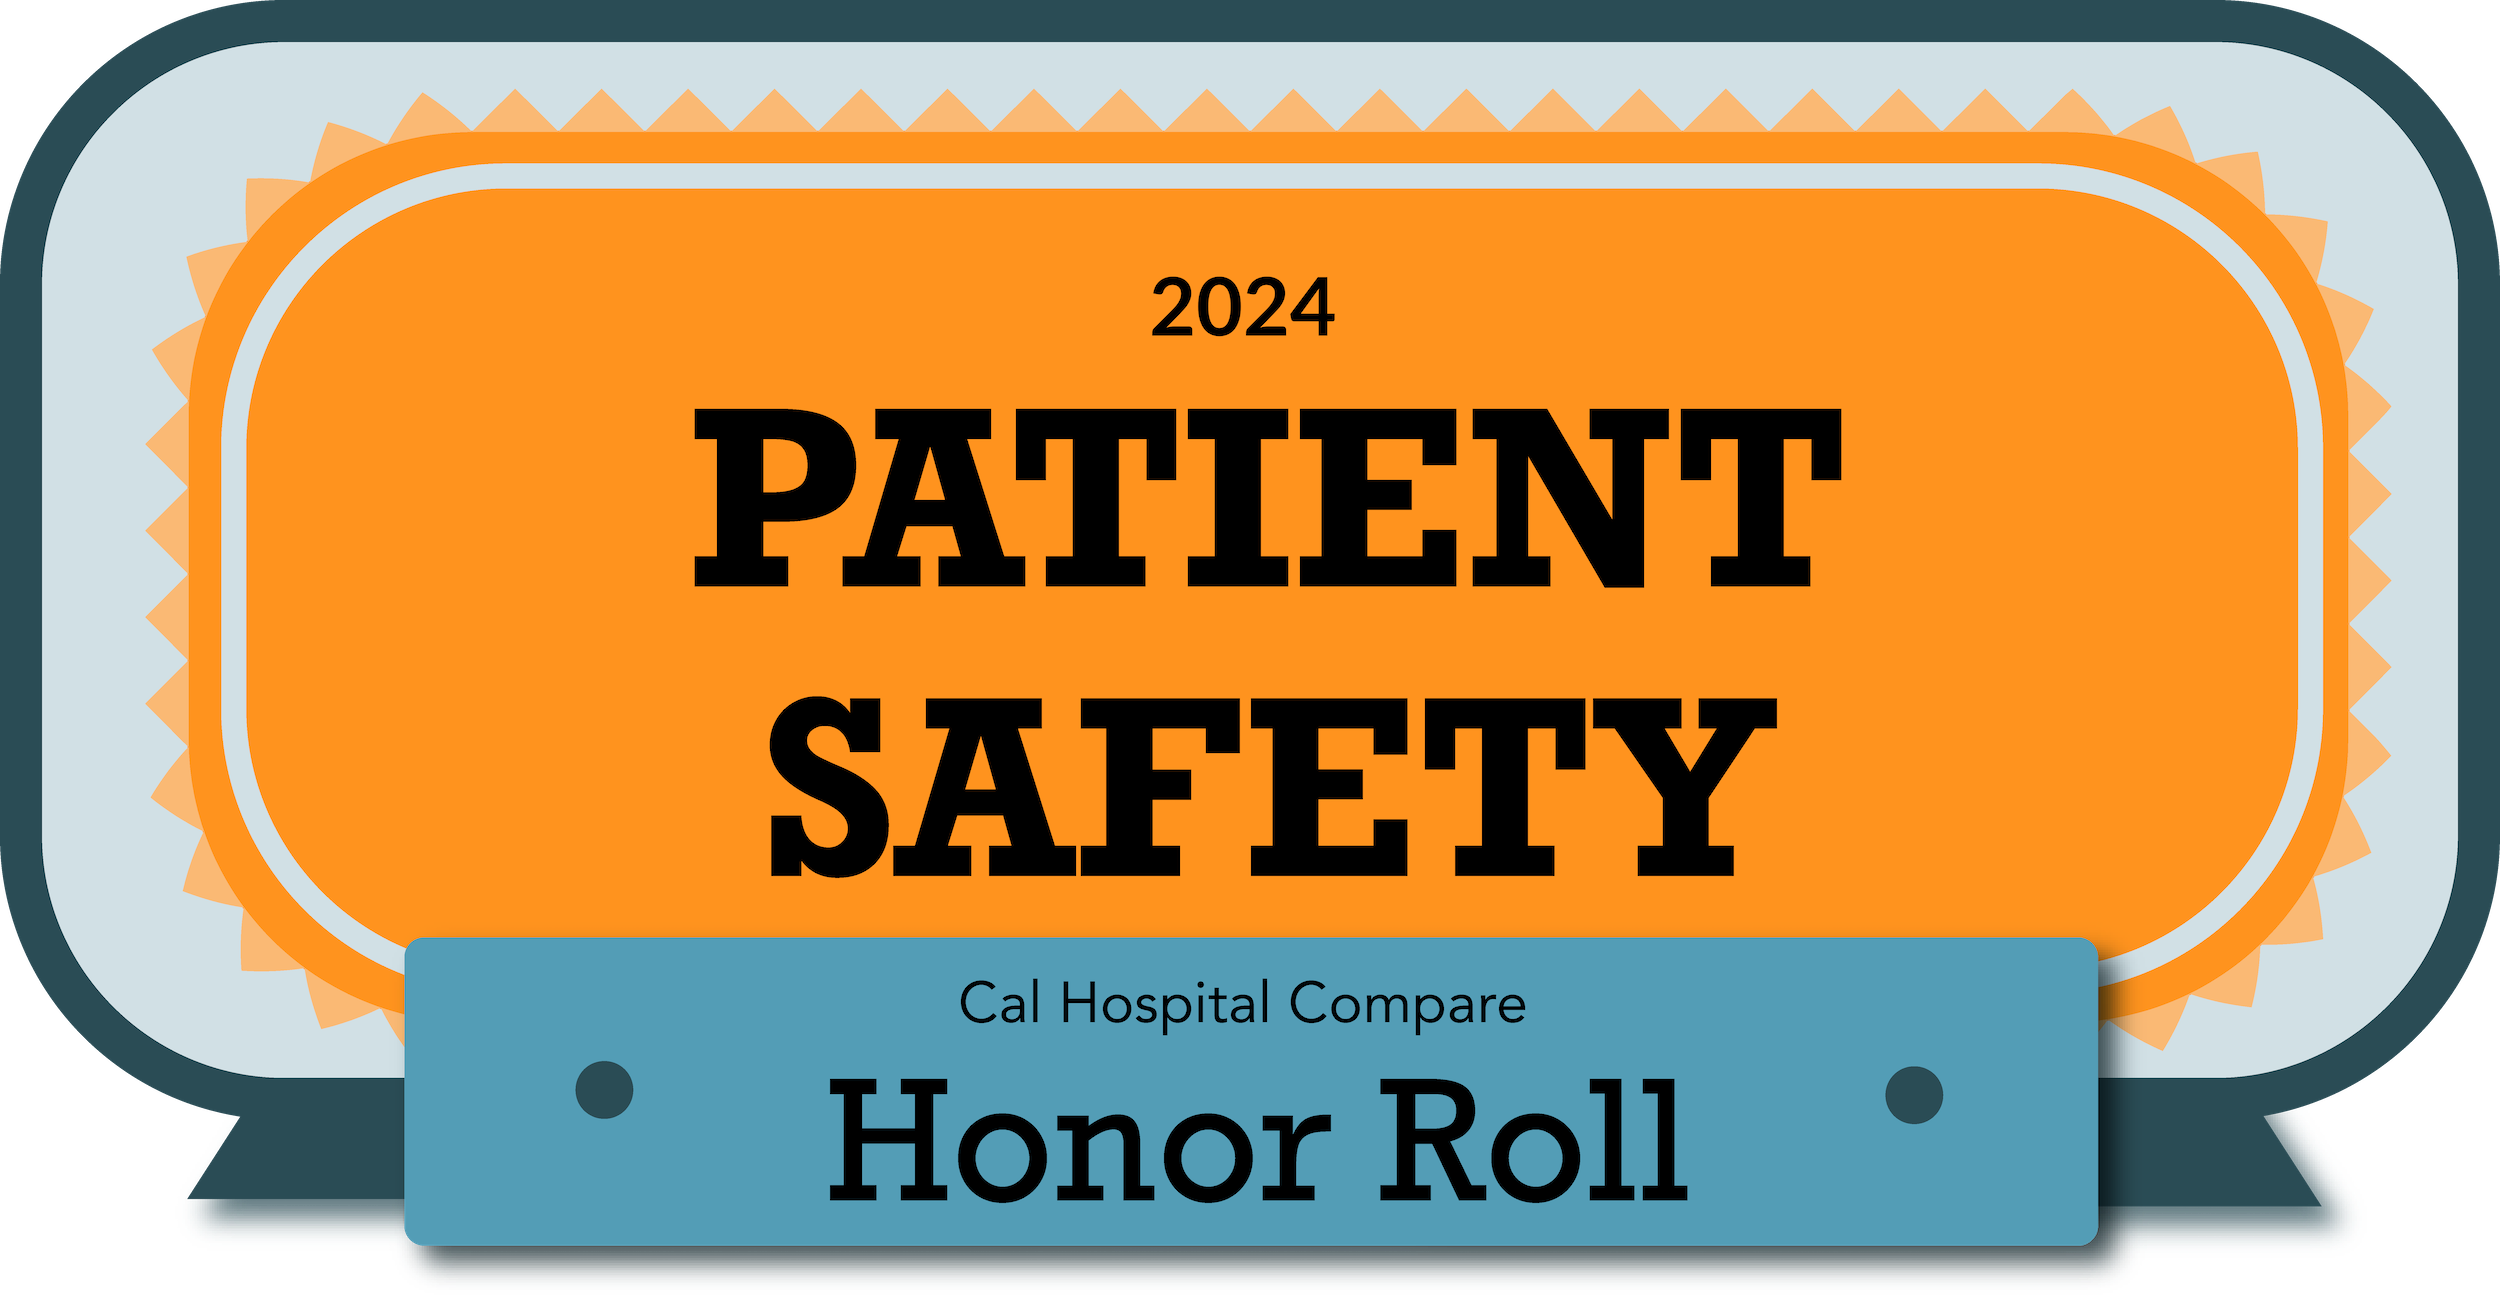 patient safety honor roll badge